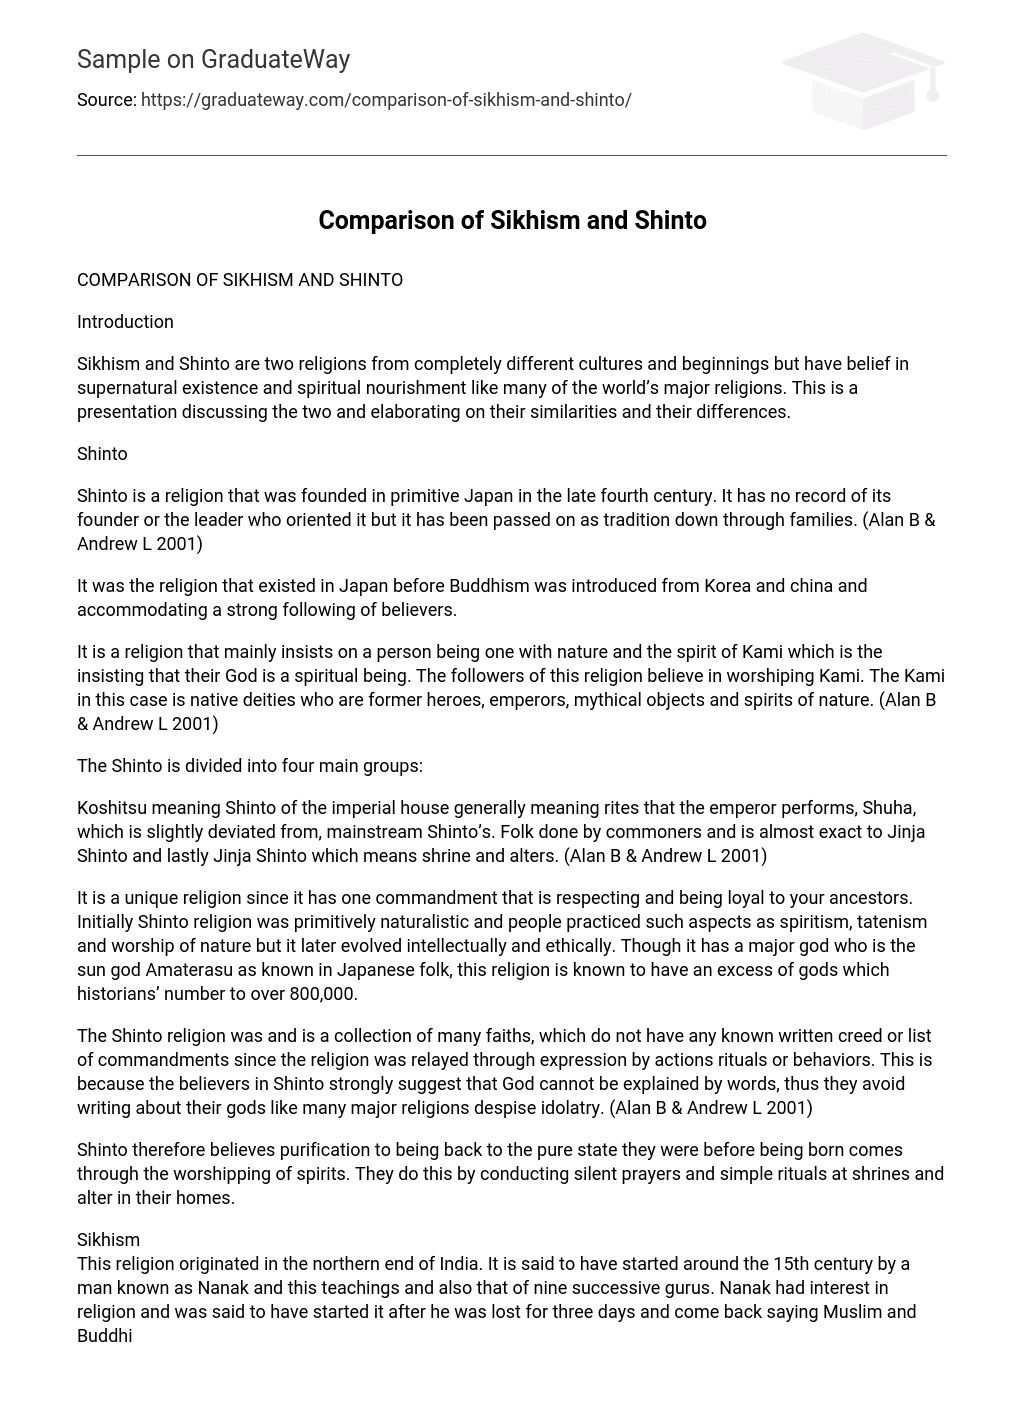 Comparison of Sikhism and Shinto